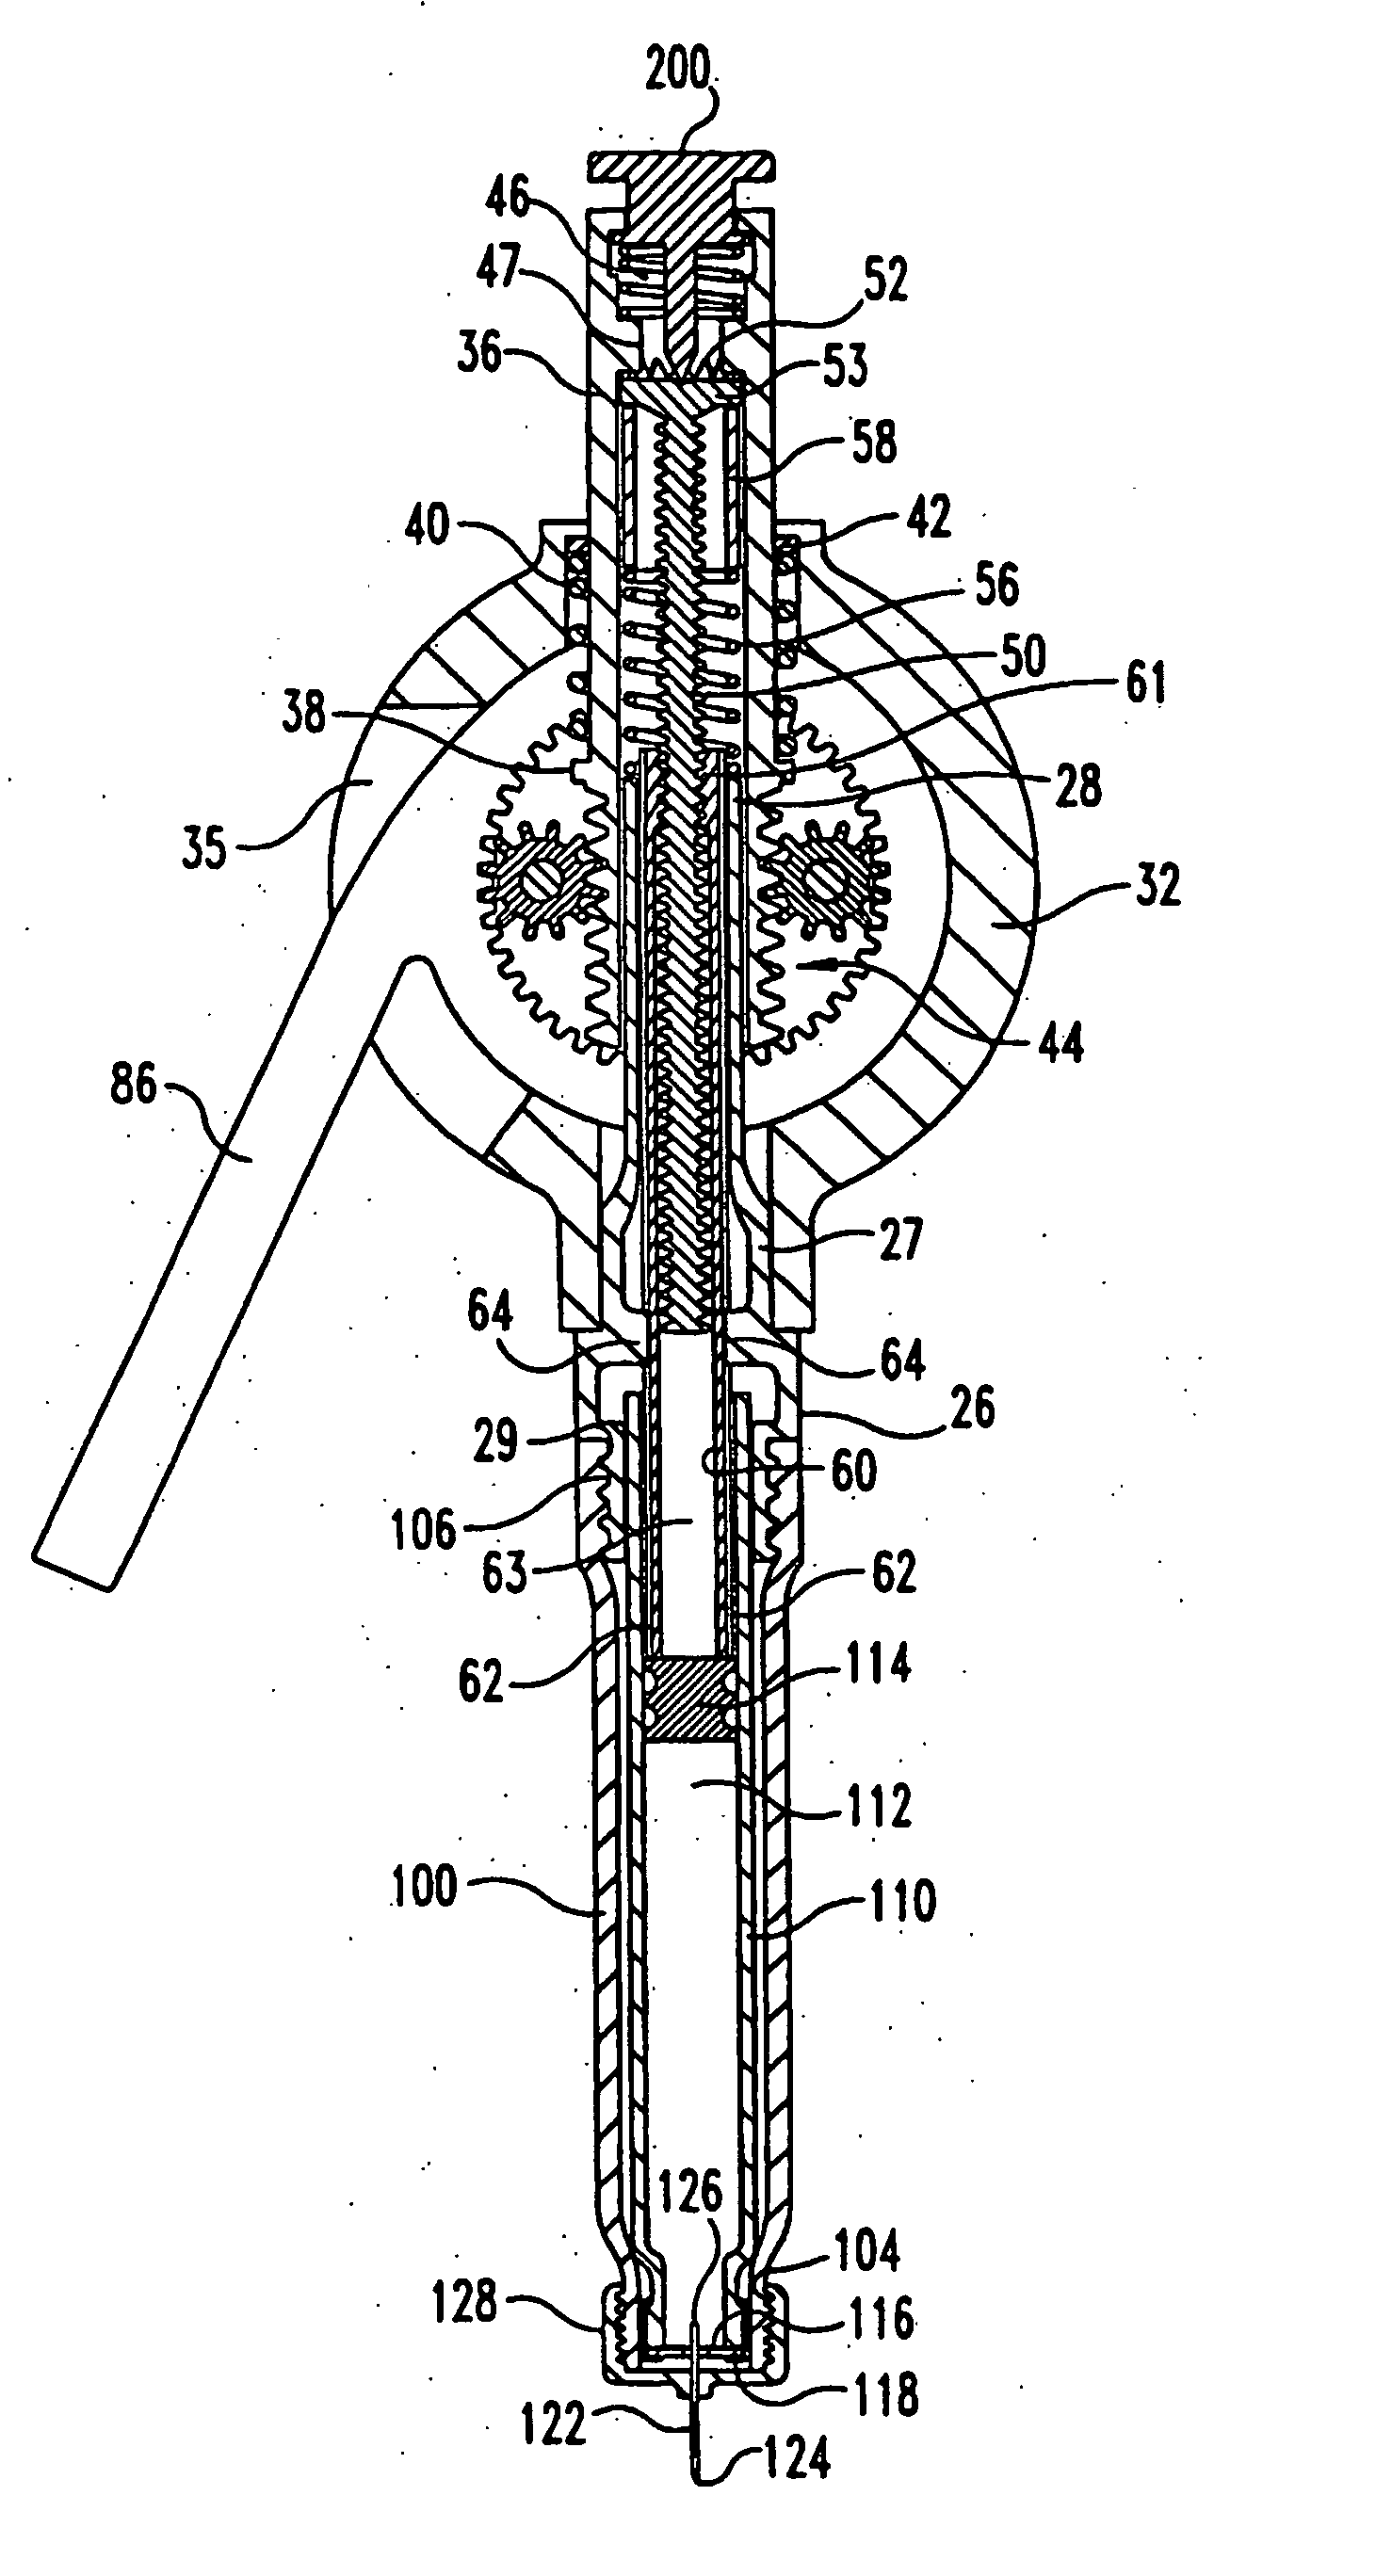 Medication dispensing apparatus with squeezable actuator